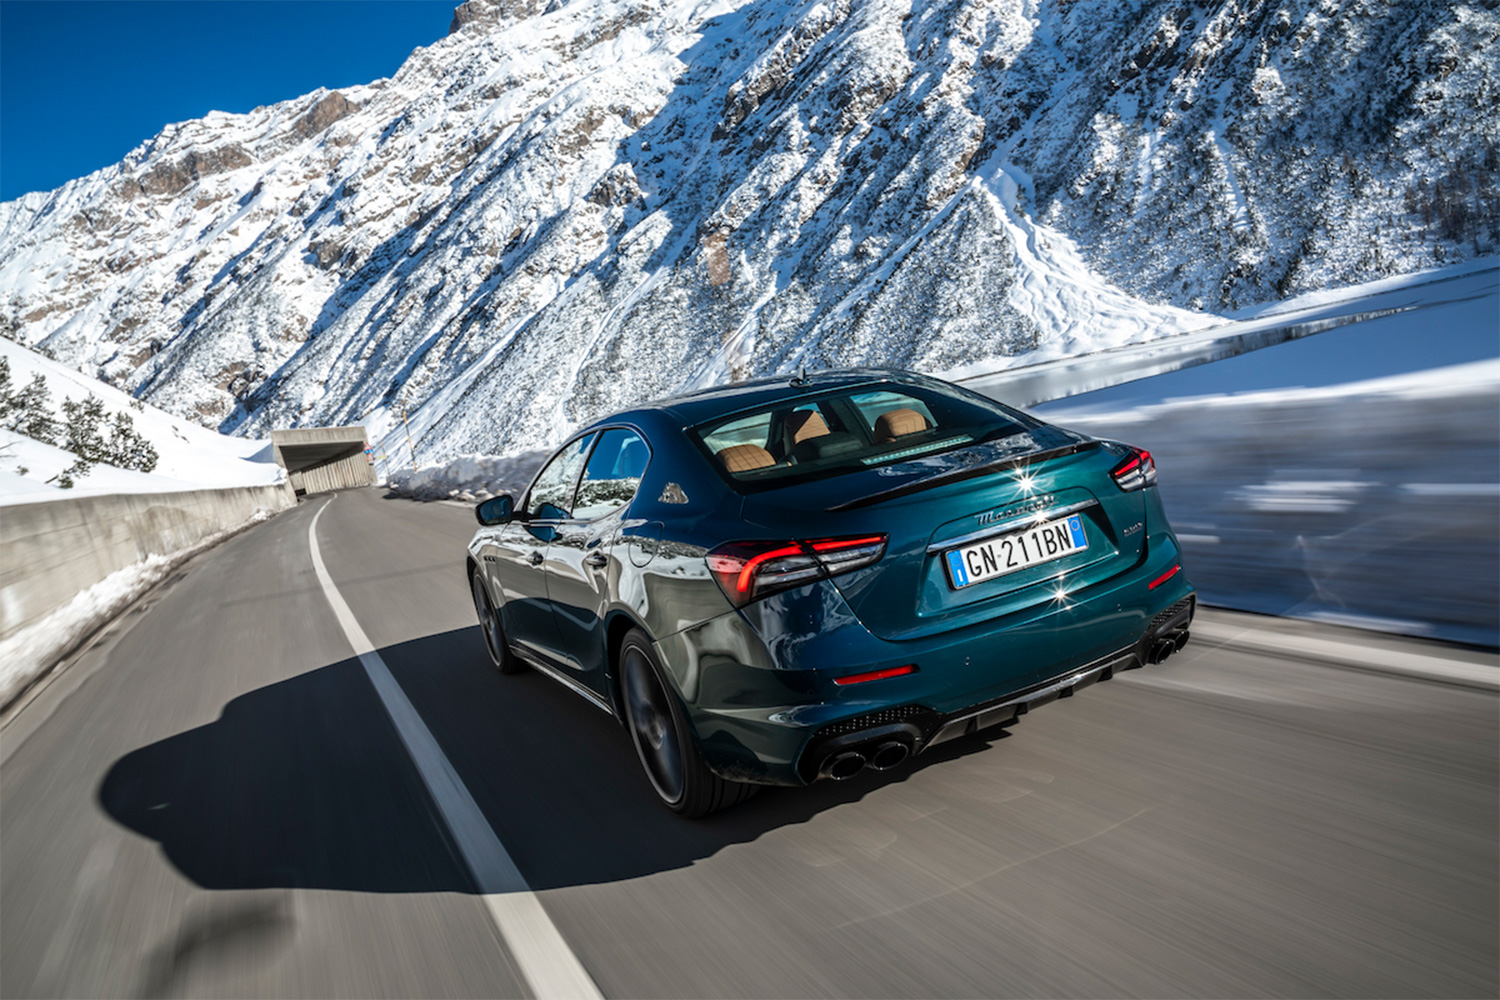 The world's fastest sedan, a Maserati, driving through the Alps in Italy